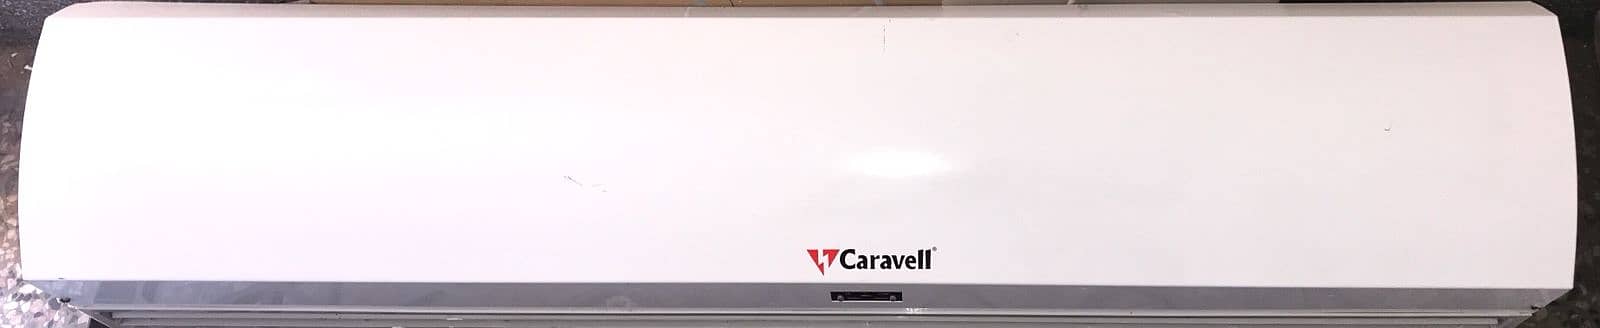 3 Carevell Air Curtain 4 ft (2 piece), 6 ft (1 piece) 1